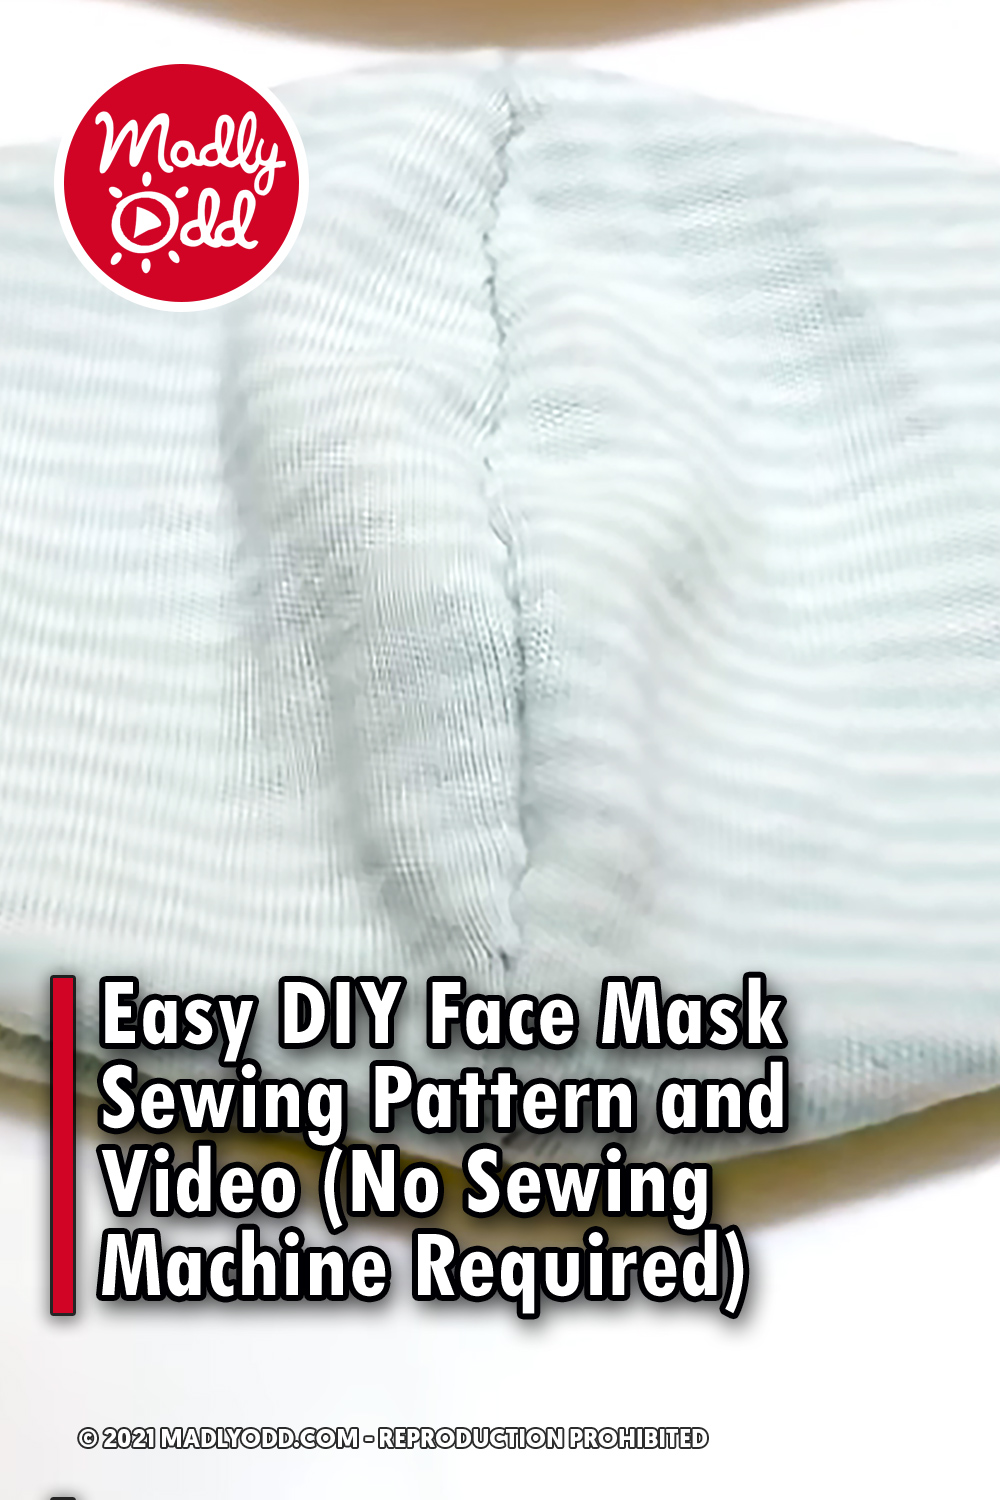 Easy DIY Face Mask Sewing Pattern and Video (No Sewing Machine Required)